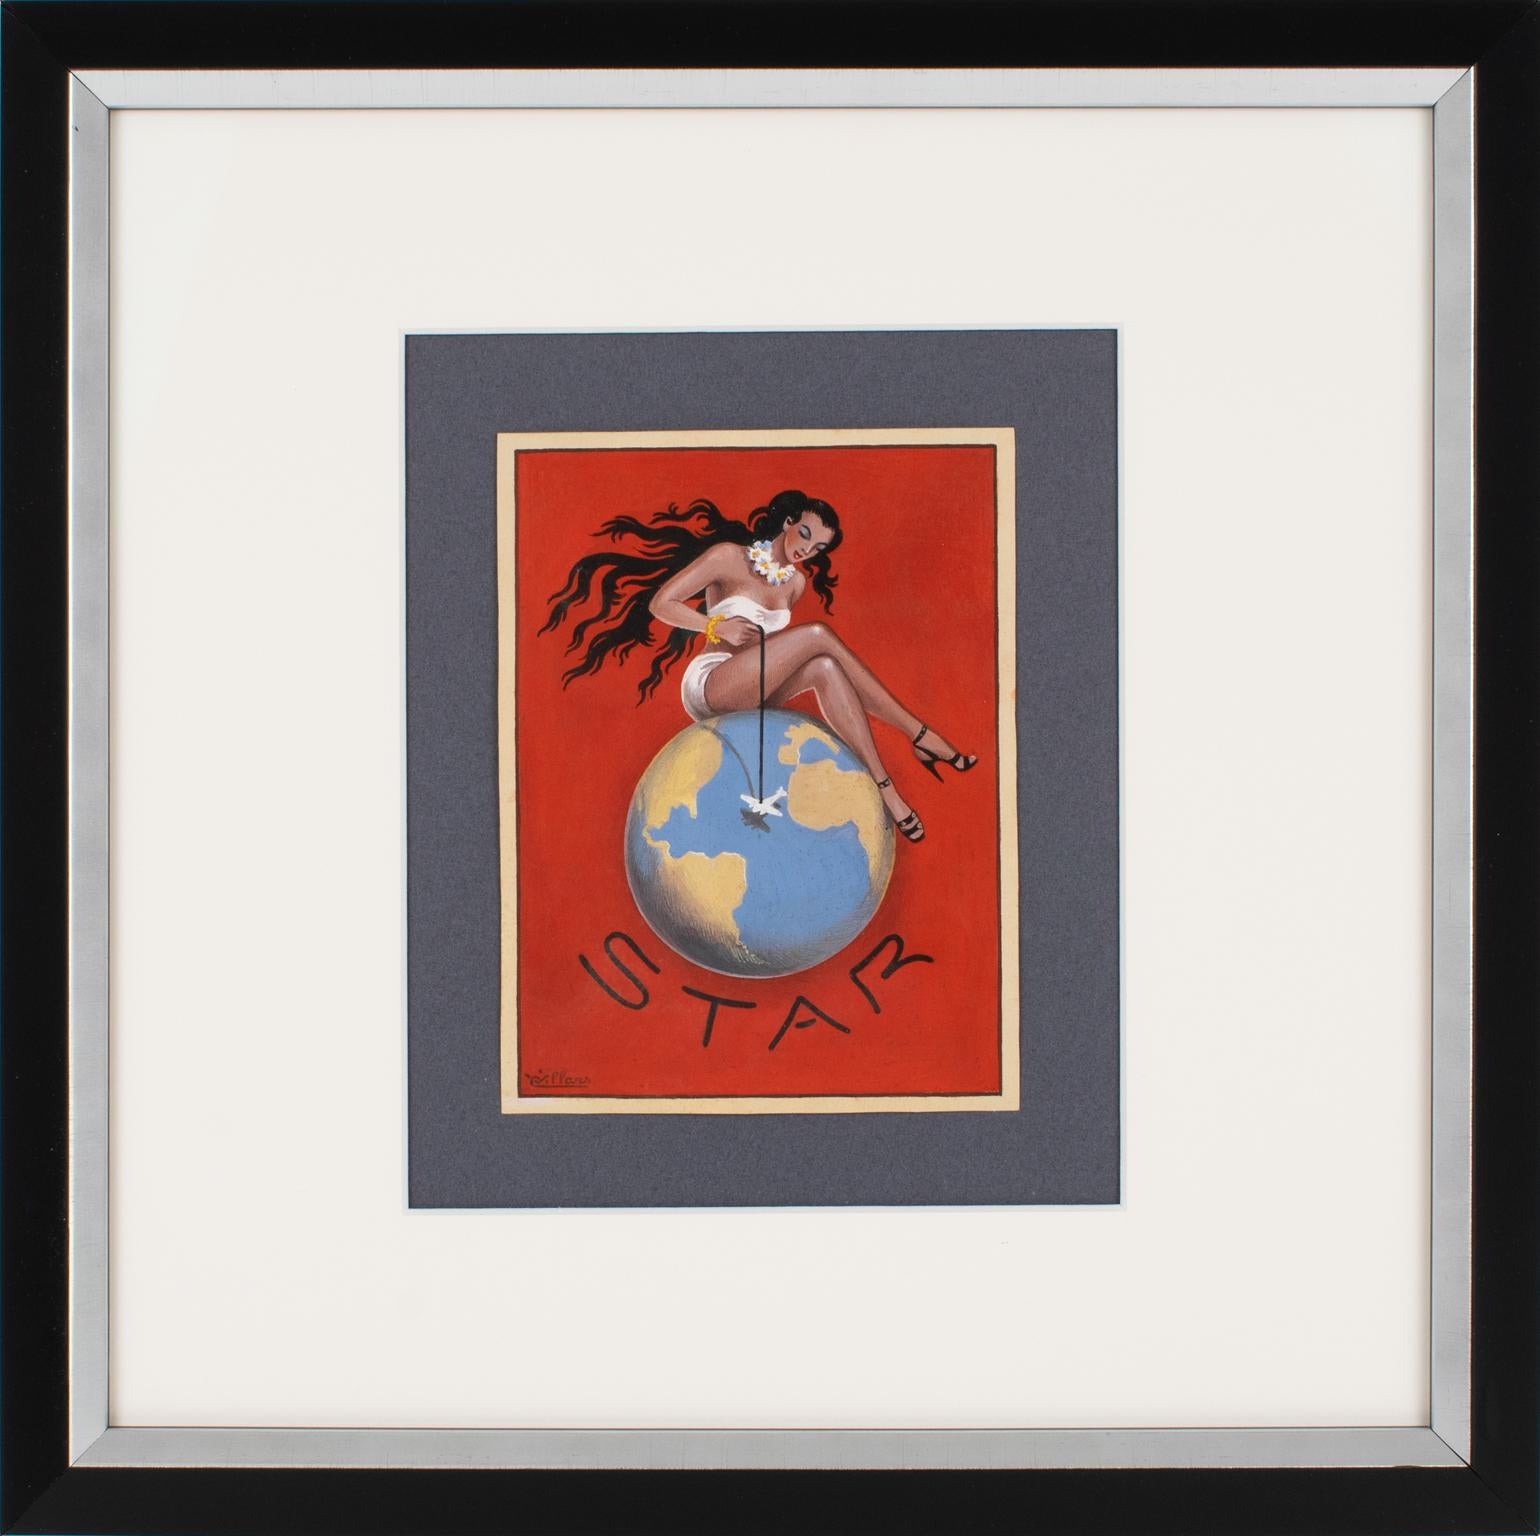 This is an original Post-war illustration drawing, hand-painted with gouache on Arches Velum paper by French artist C. Villars (France - 20th Century). The poster project features a young woman in a bikini swimsuit sitting on a globe. She holds in